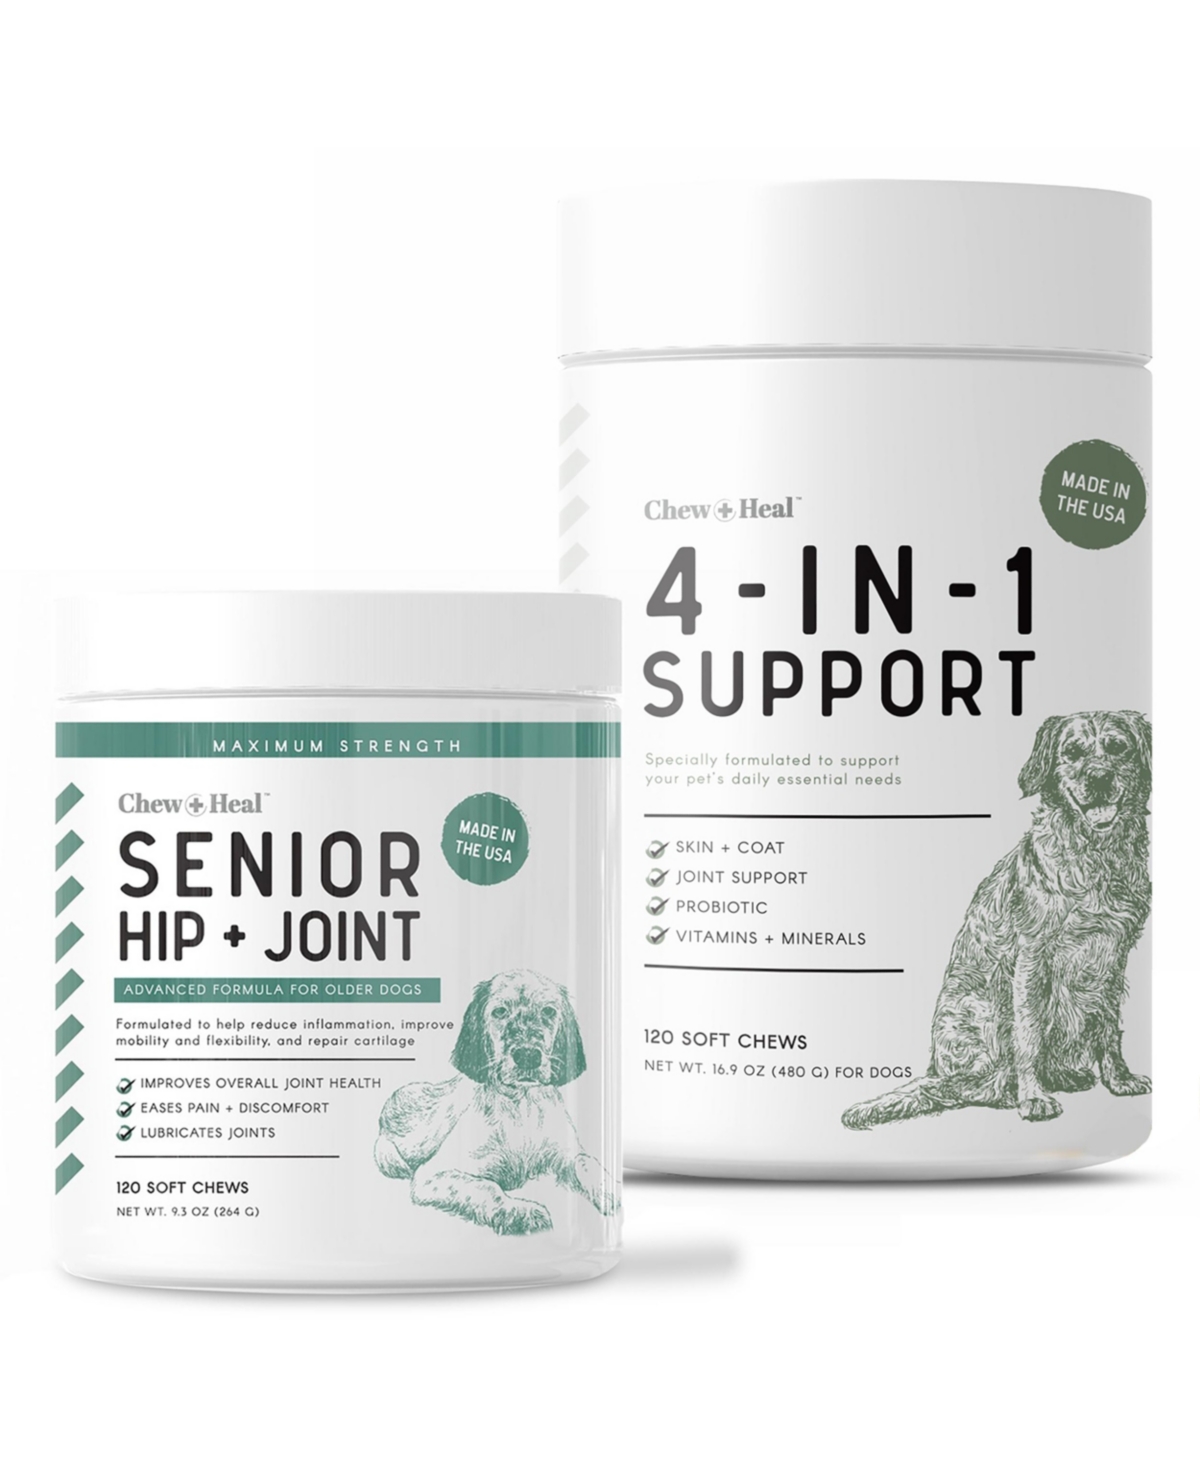 MaxProtect Senior Hip + Joint Support, Dog Supplement & Multivitamin - 240 Delicious Total Chews